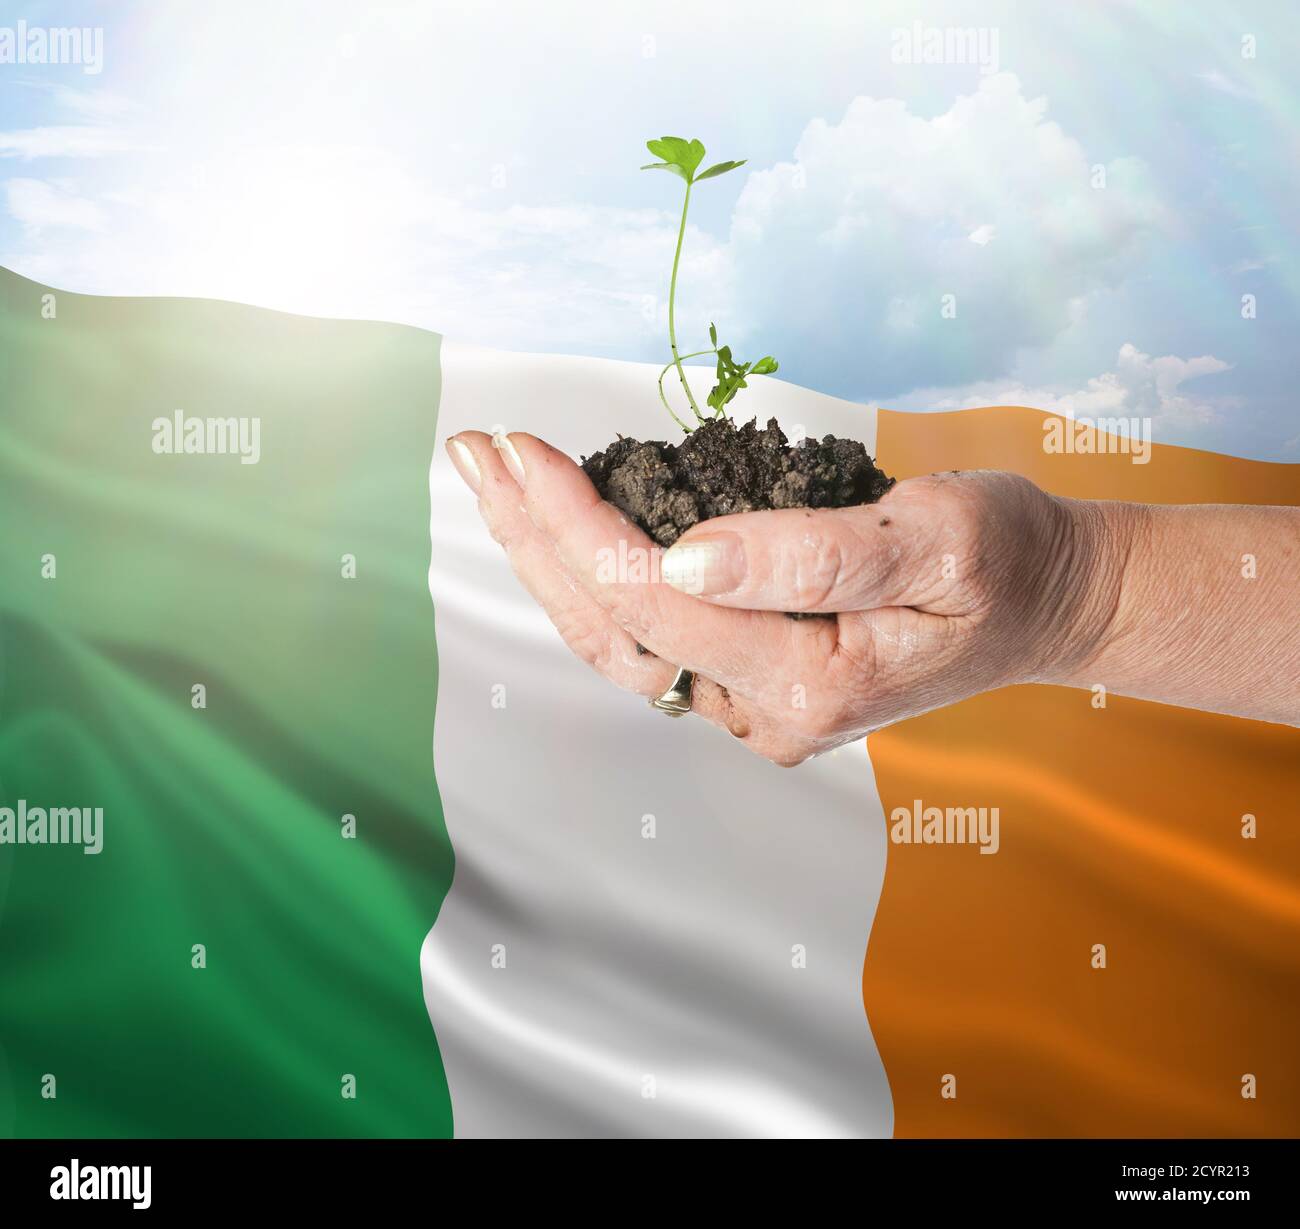 Ireland growth and new beginning. Green renewable energy and ecology concept. Hand holding young plant. Stock Photo